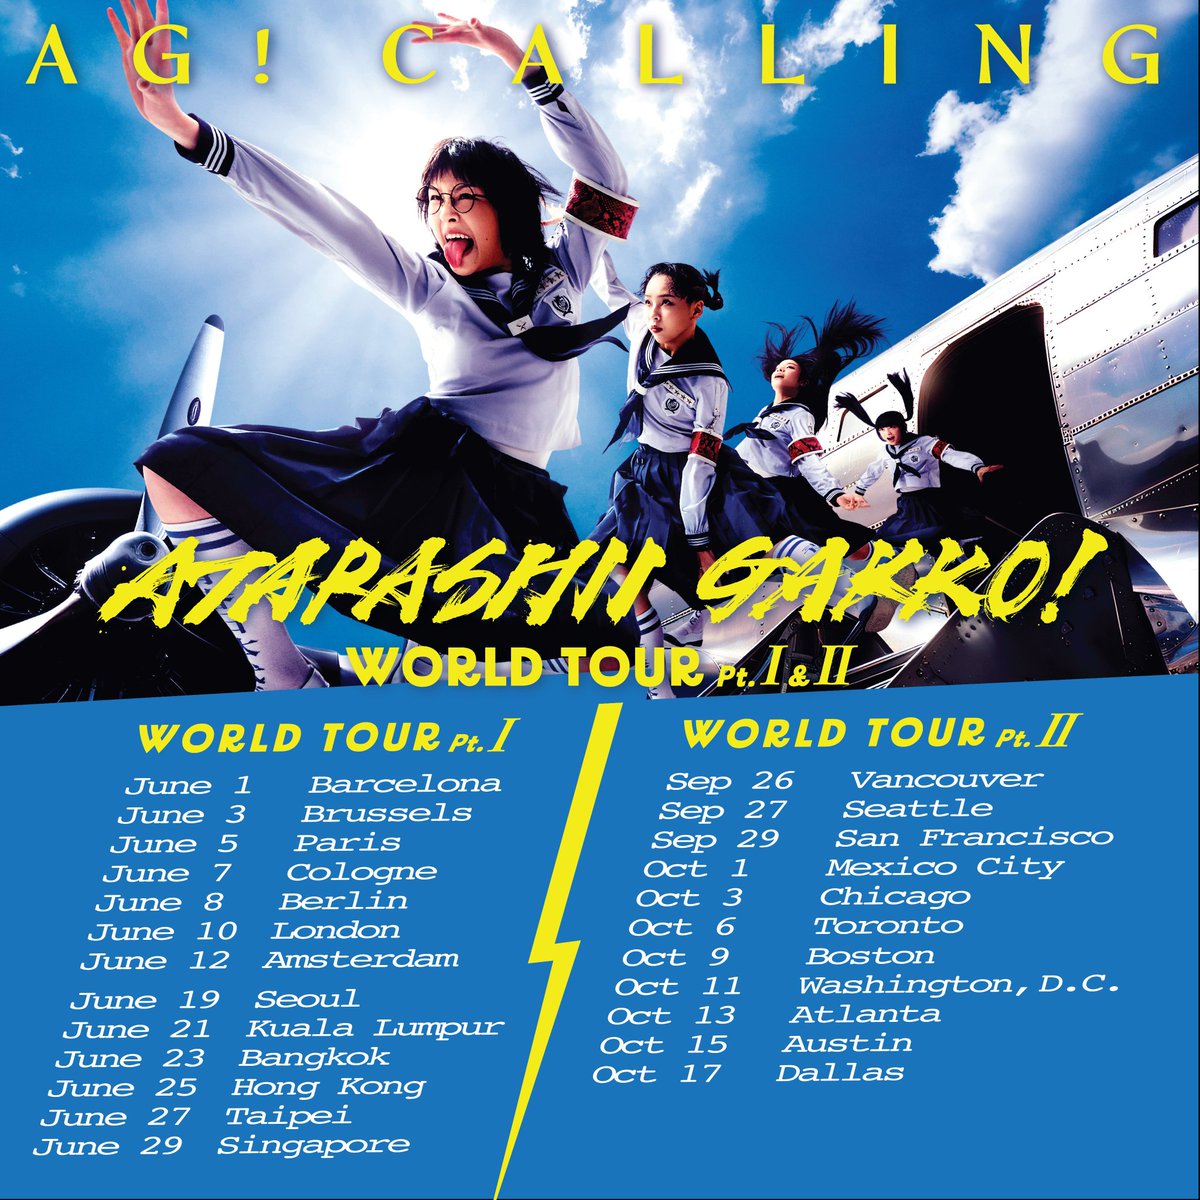 ATARASHII GAKKO announces the part II to their world tour including several locations throughout the US @japanleaders #新しい学校のリーダーズ